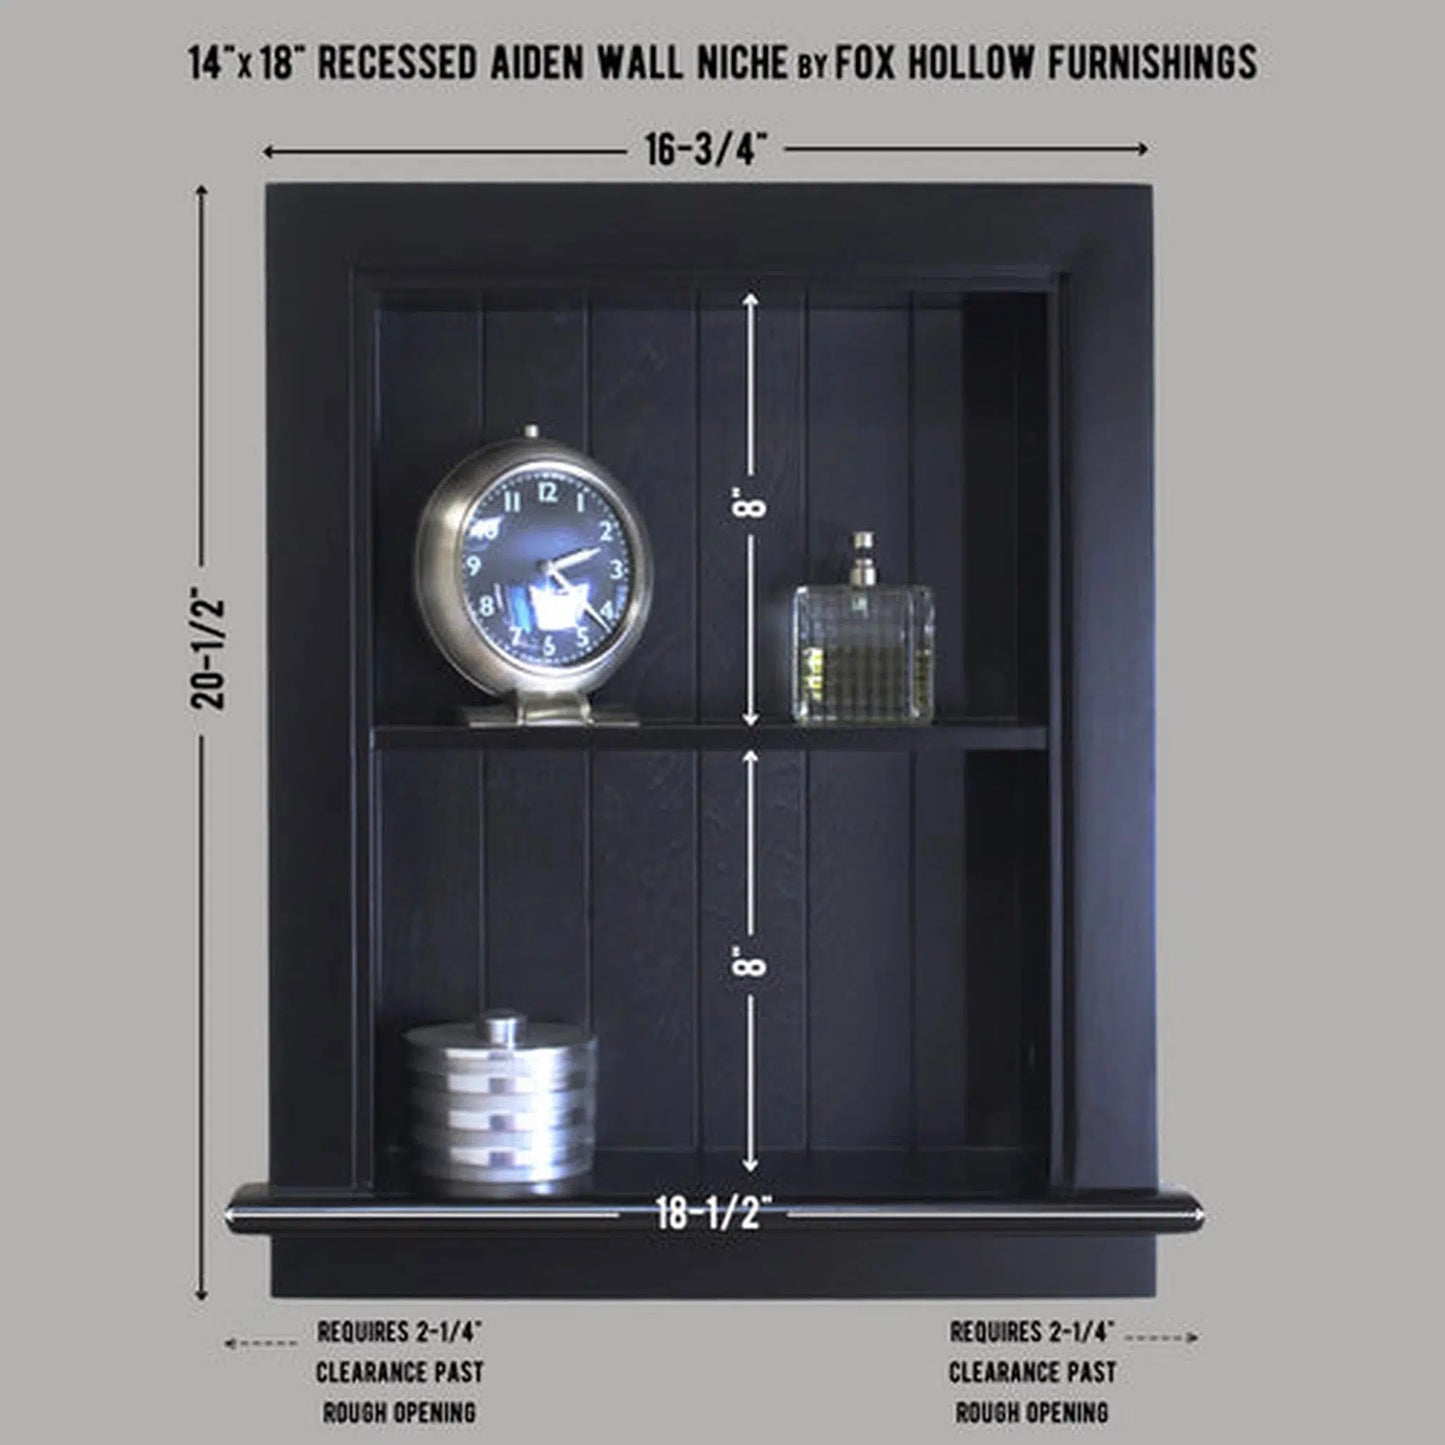 Fox Hollow Furnishings Aiden 14" x 18" Black Recessed Sloane Wall Niche With Plain Back and One Fixed Shelf